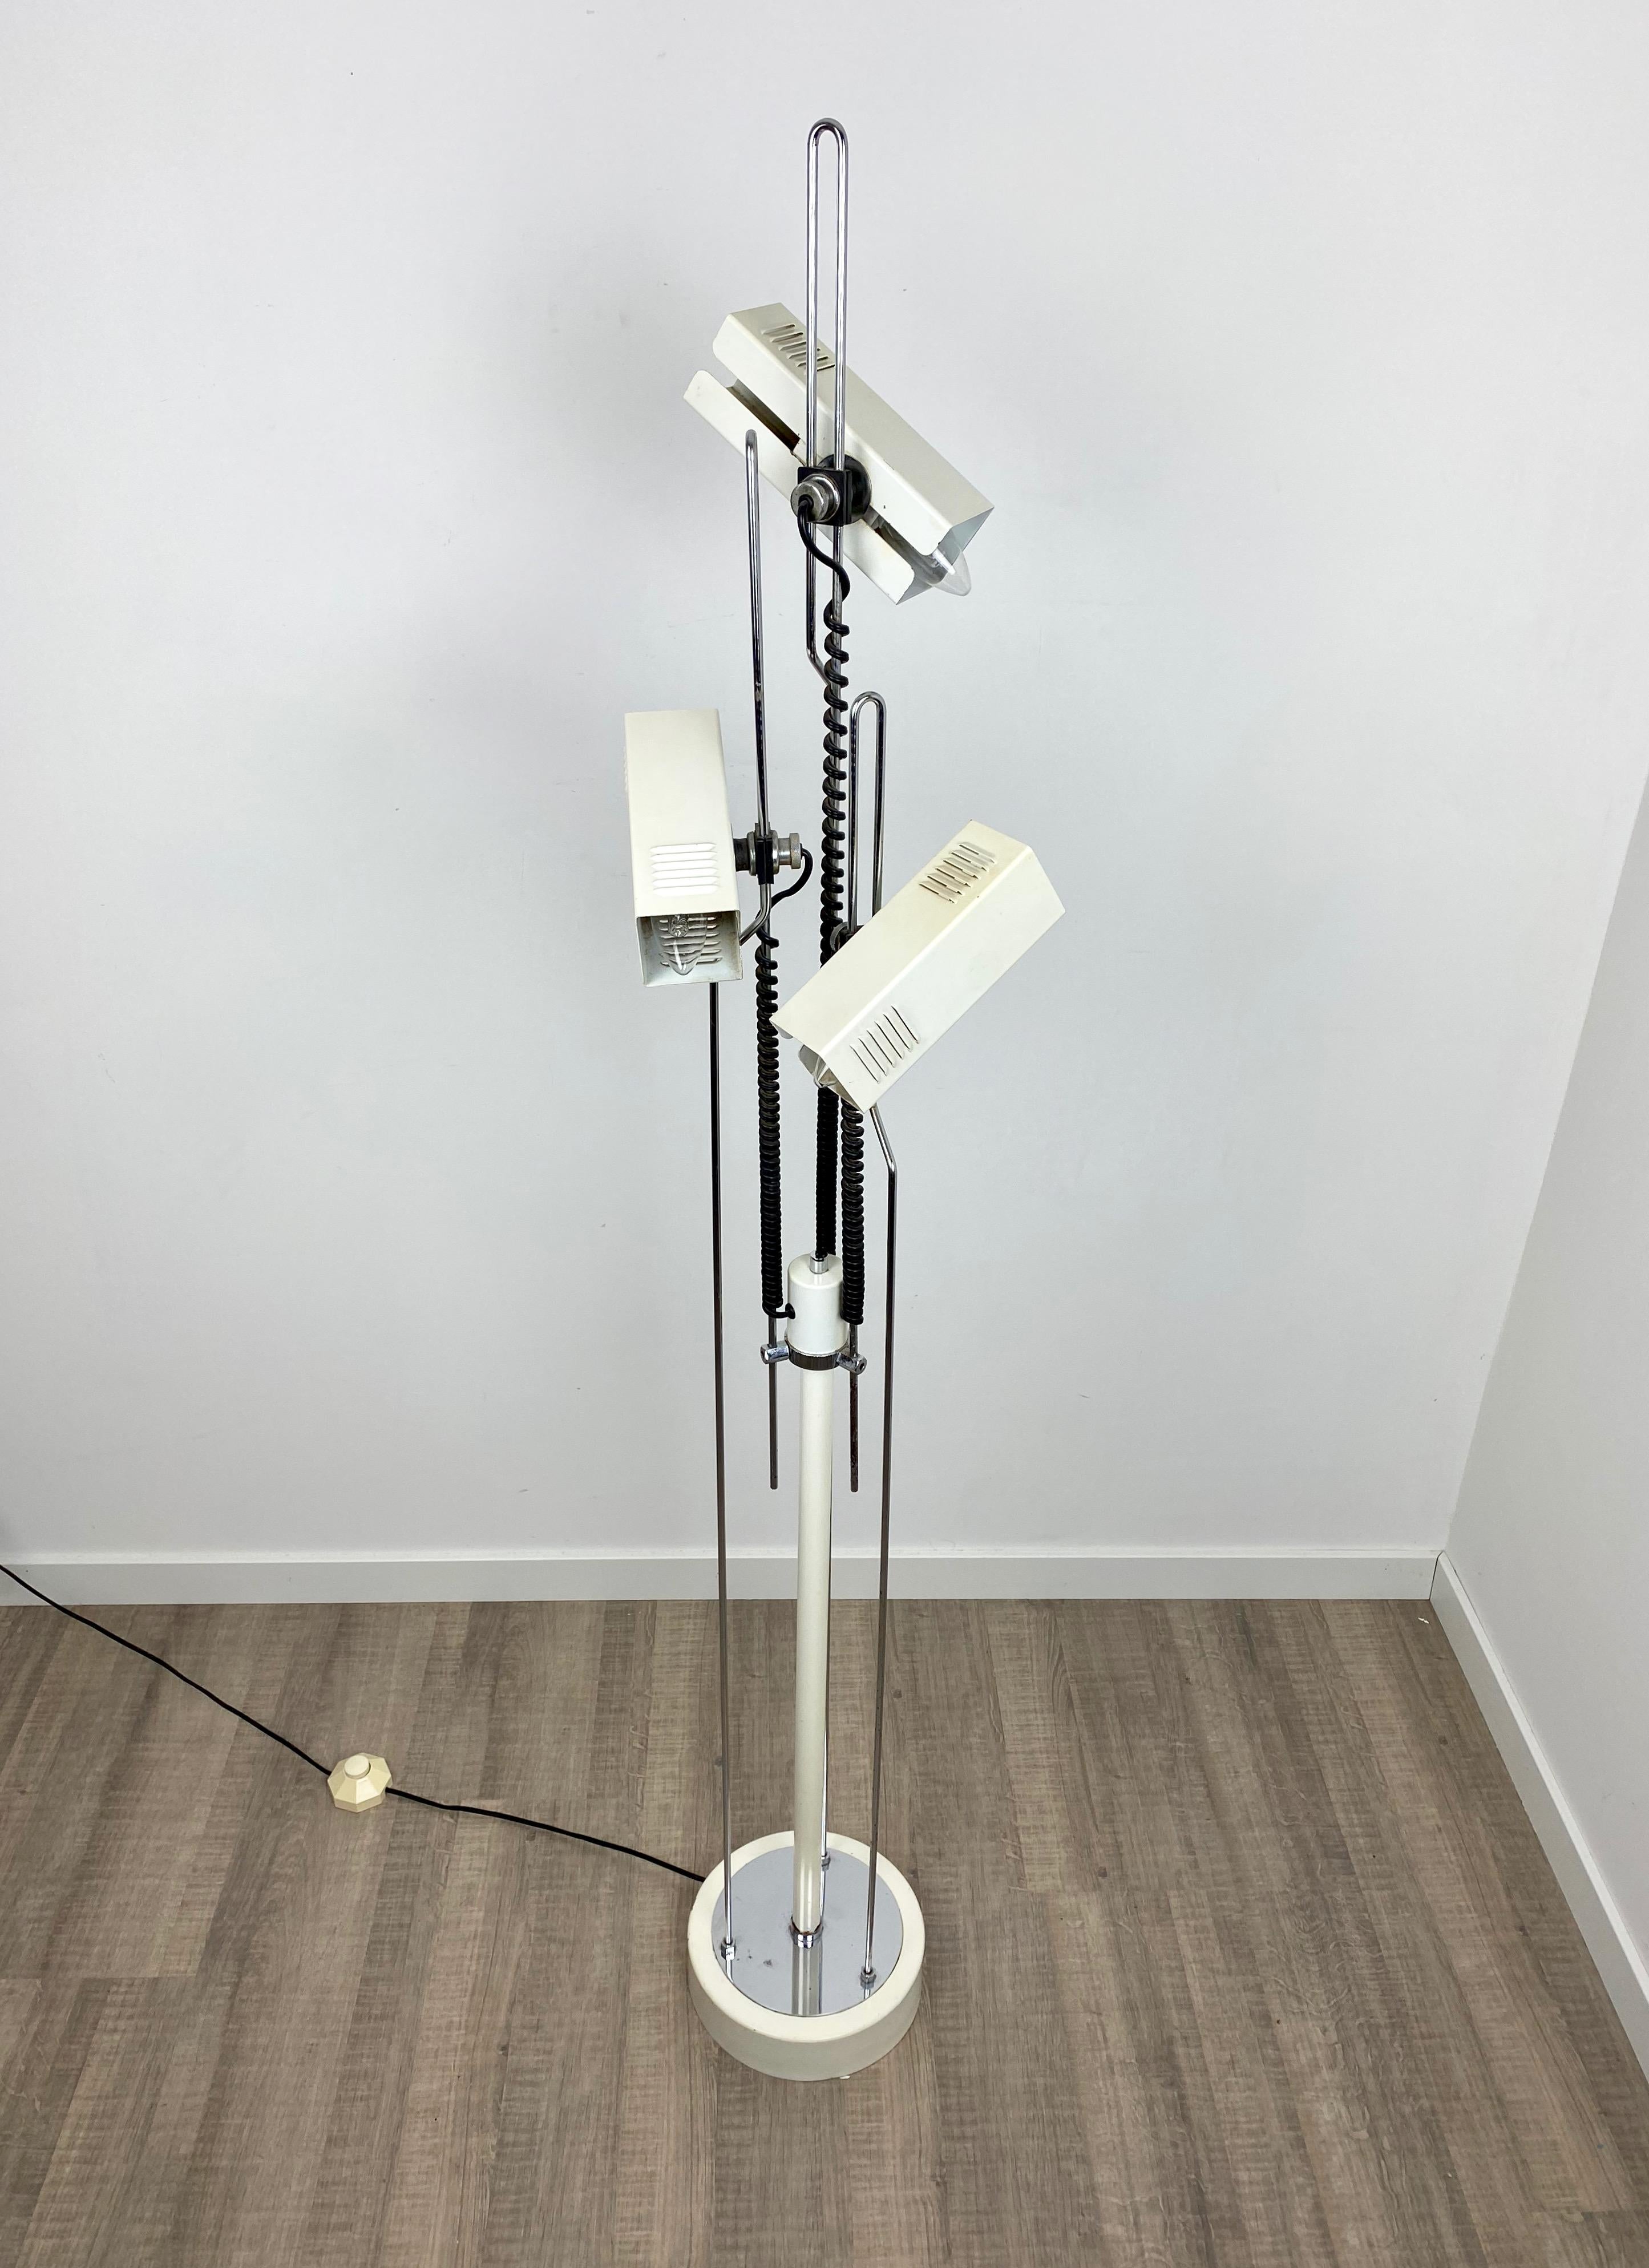 Floor lamp in the style of the Italian designer Joe Colombo. The piece features three different lights, adjustable in length and direction. Made in Italy, circa 1970.